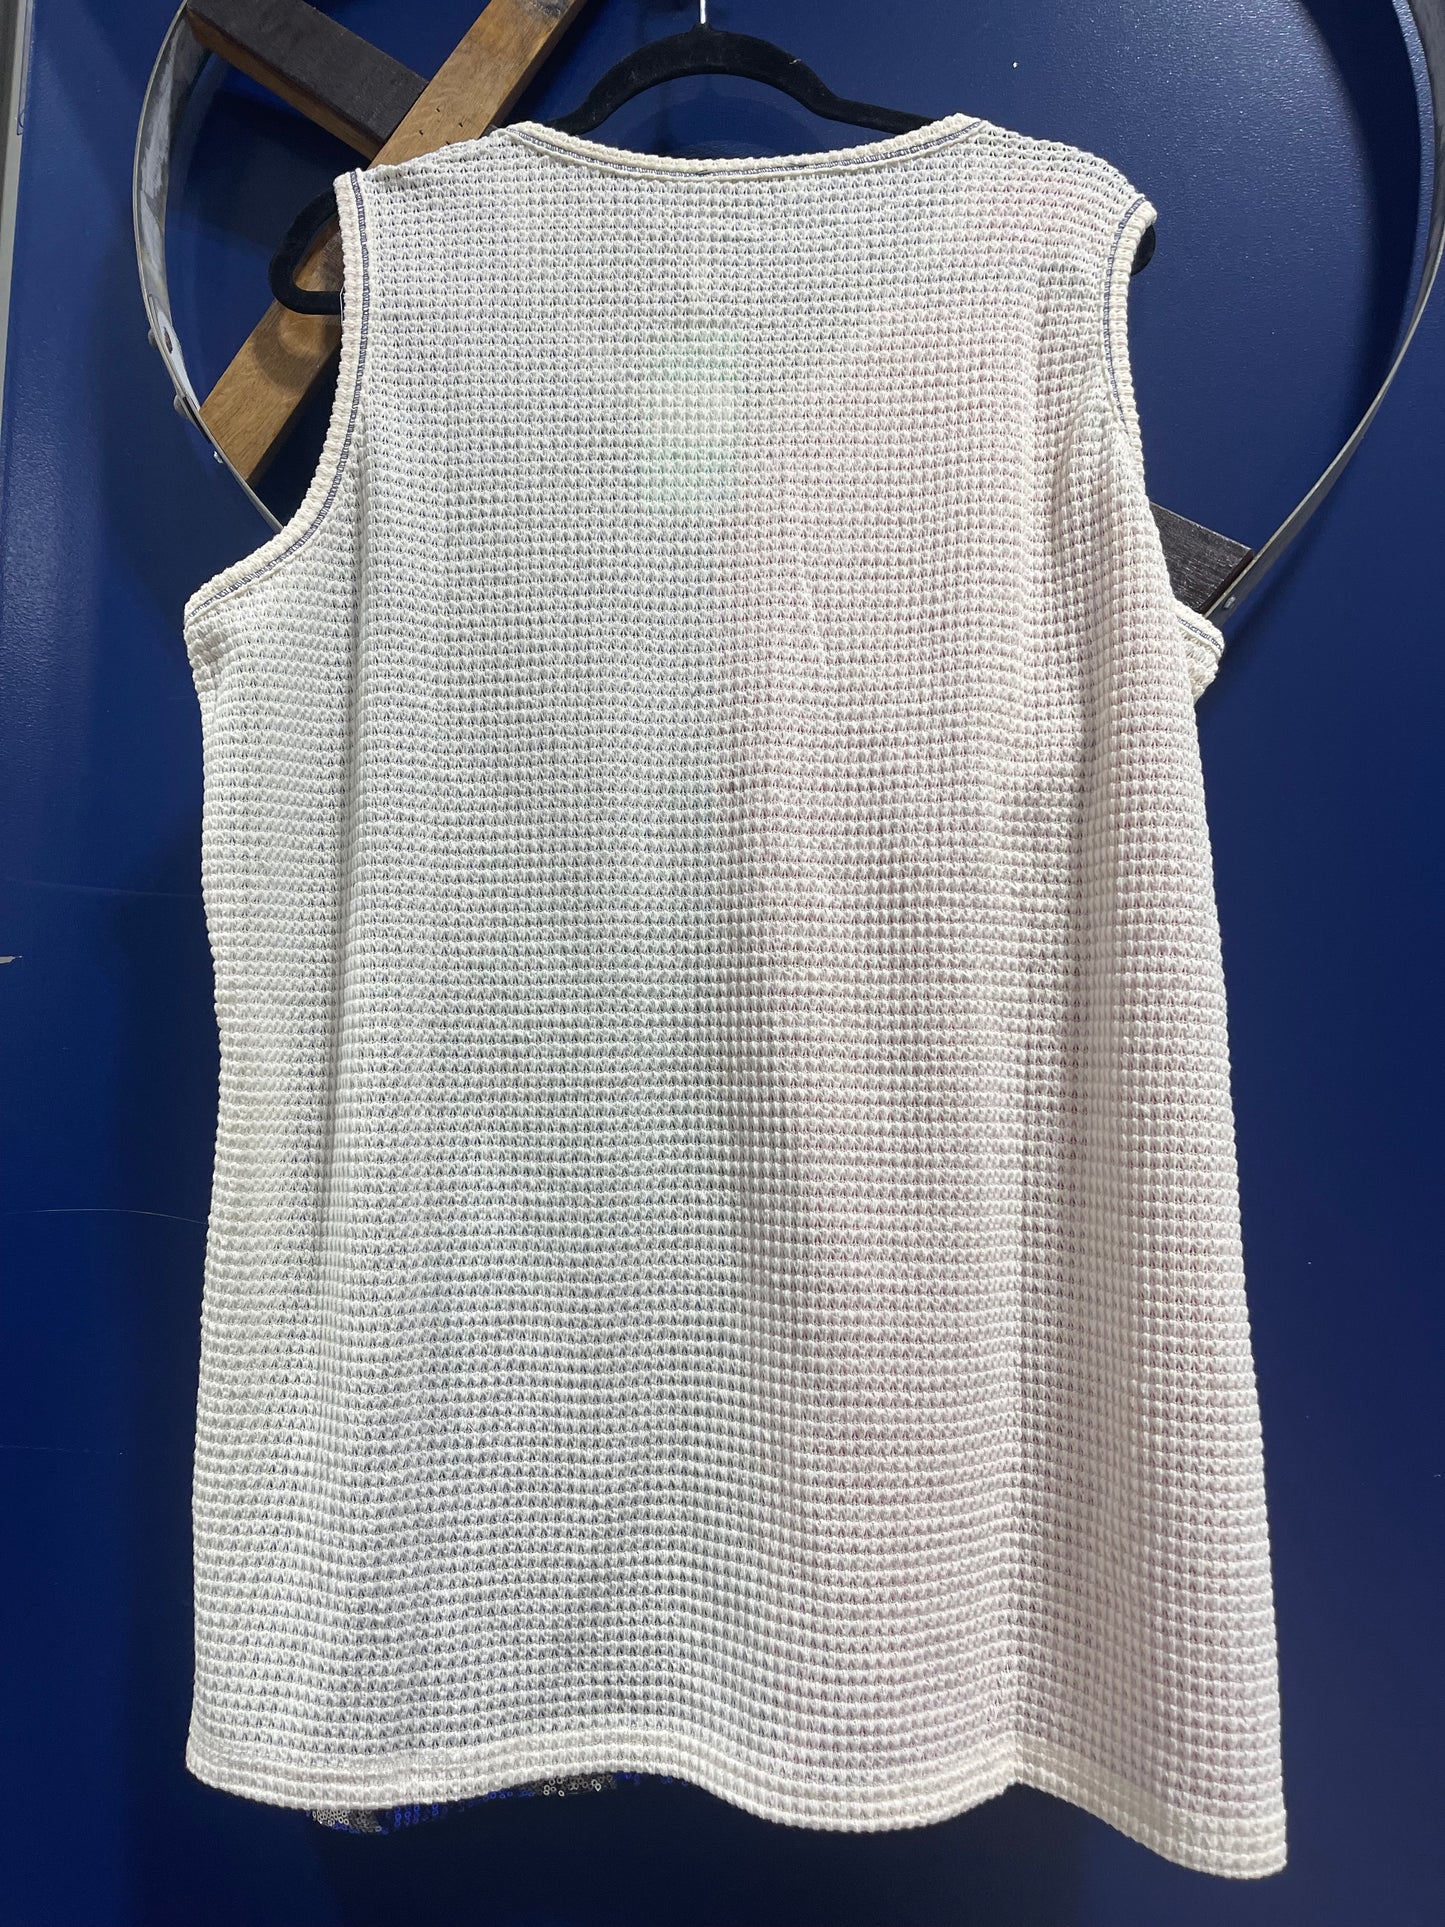 Flag Sequin Tank with Crocheted Back